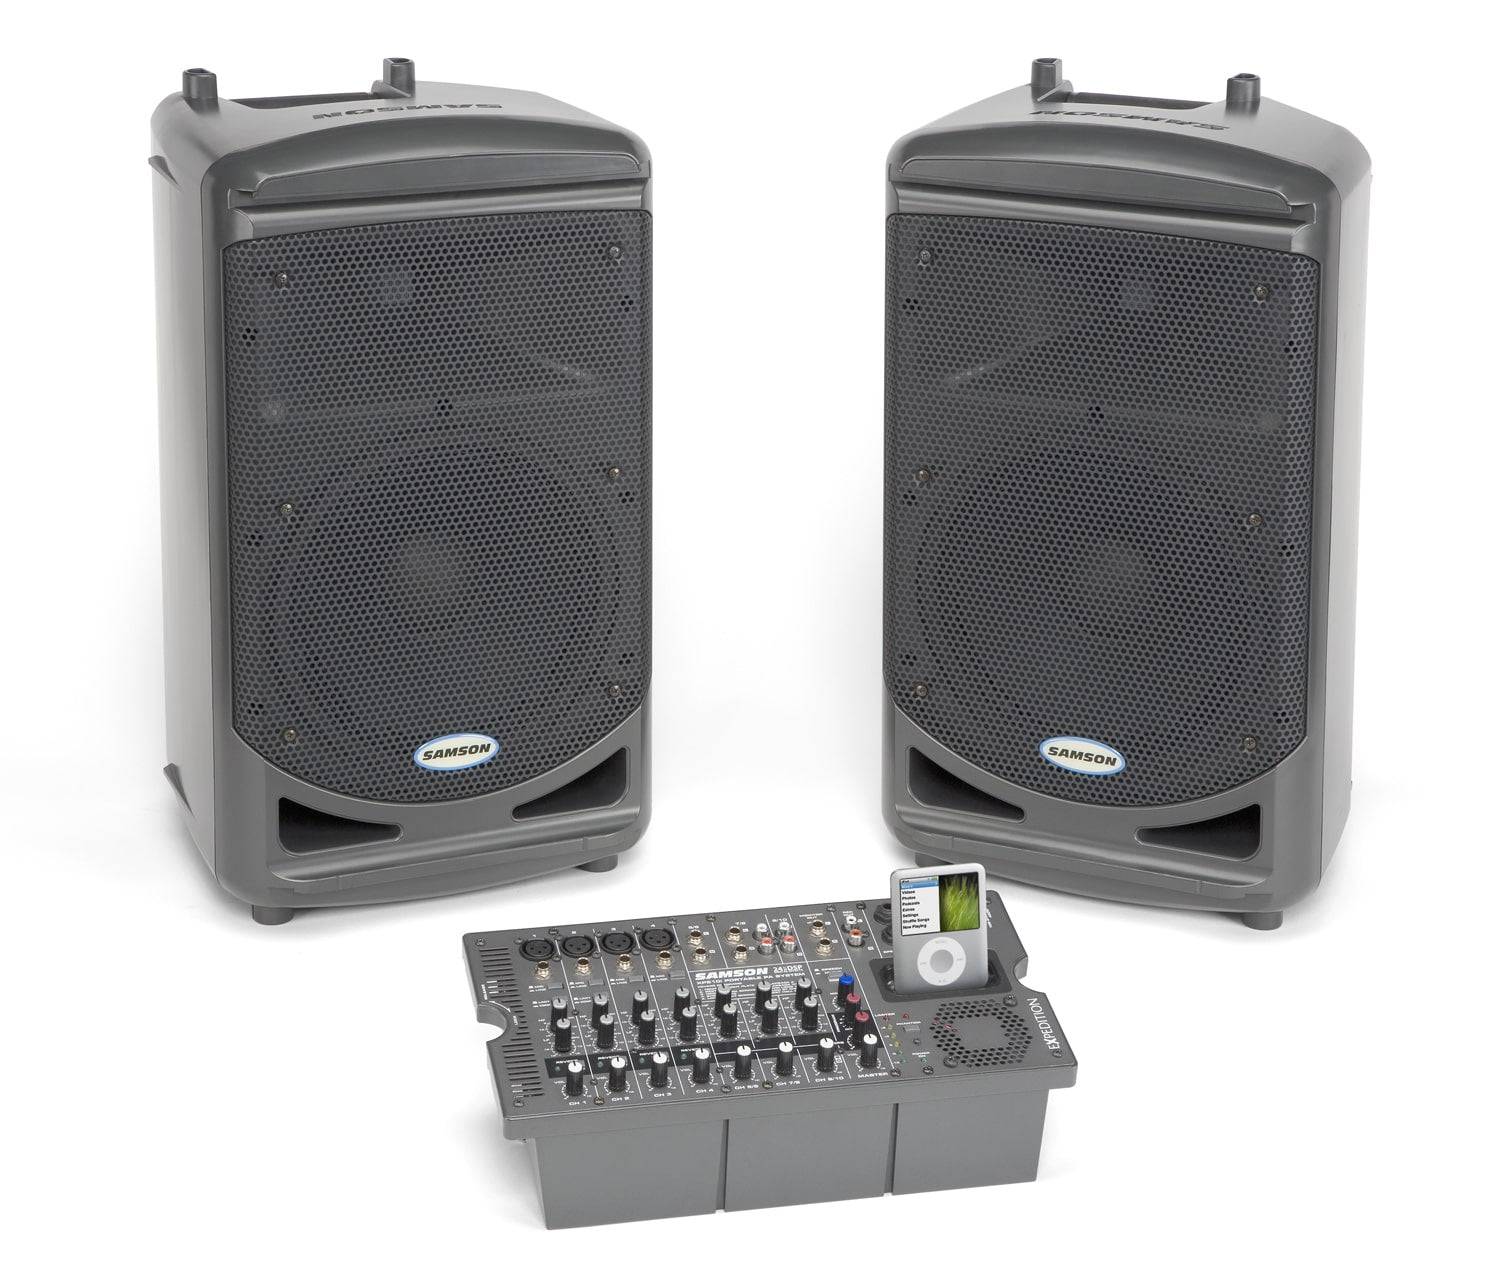 Samson Expedition XP510i Portable PA System with iPod Dock - Hollywood DJ